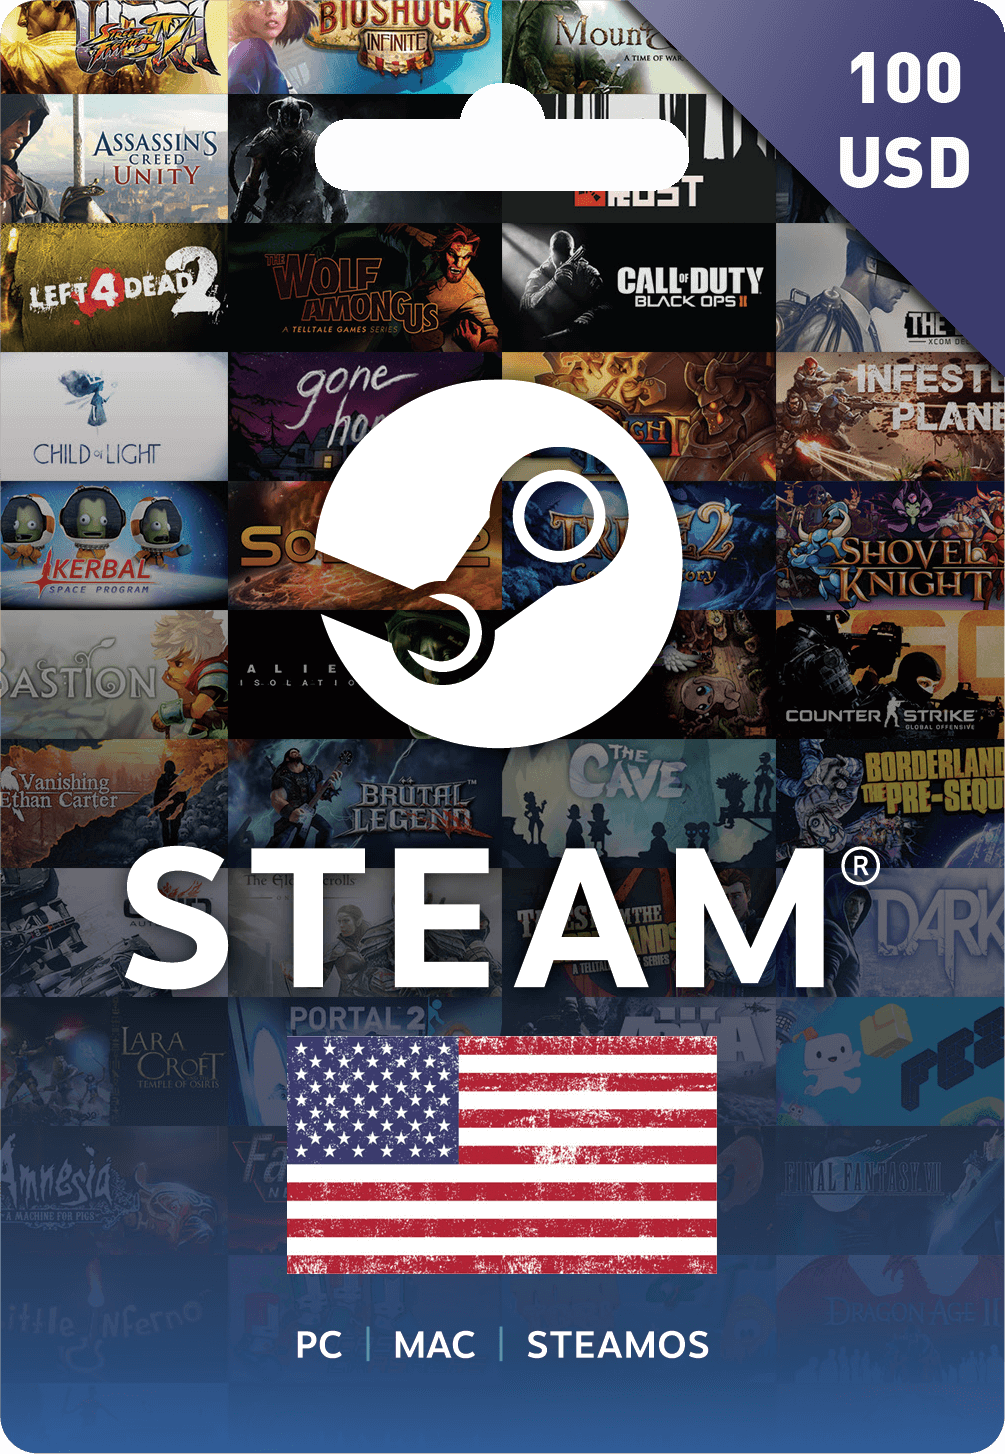 Steam Wallet Prepaid Gaming Cards for sale | eBay